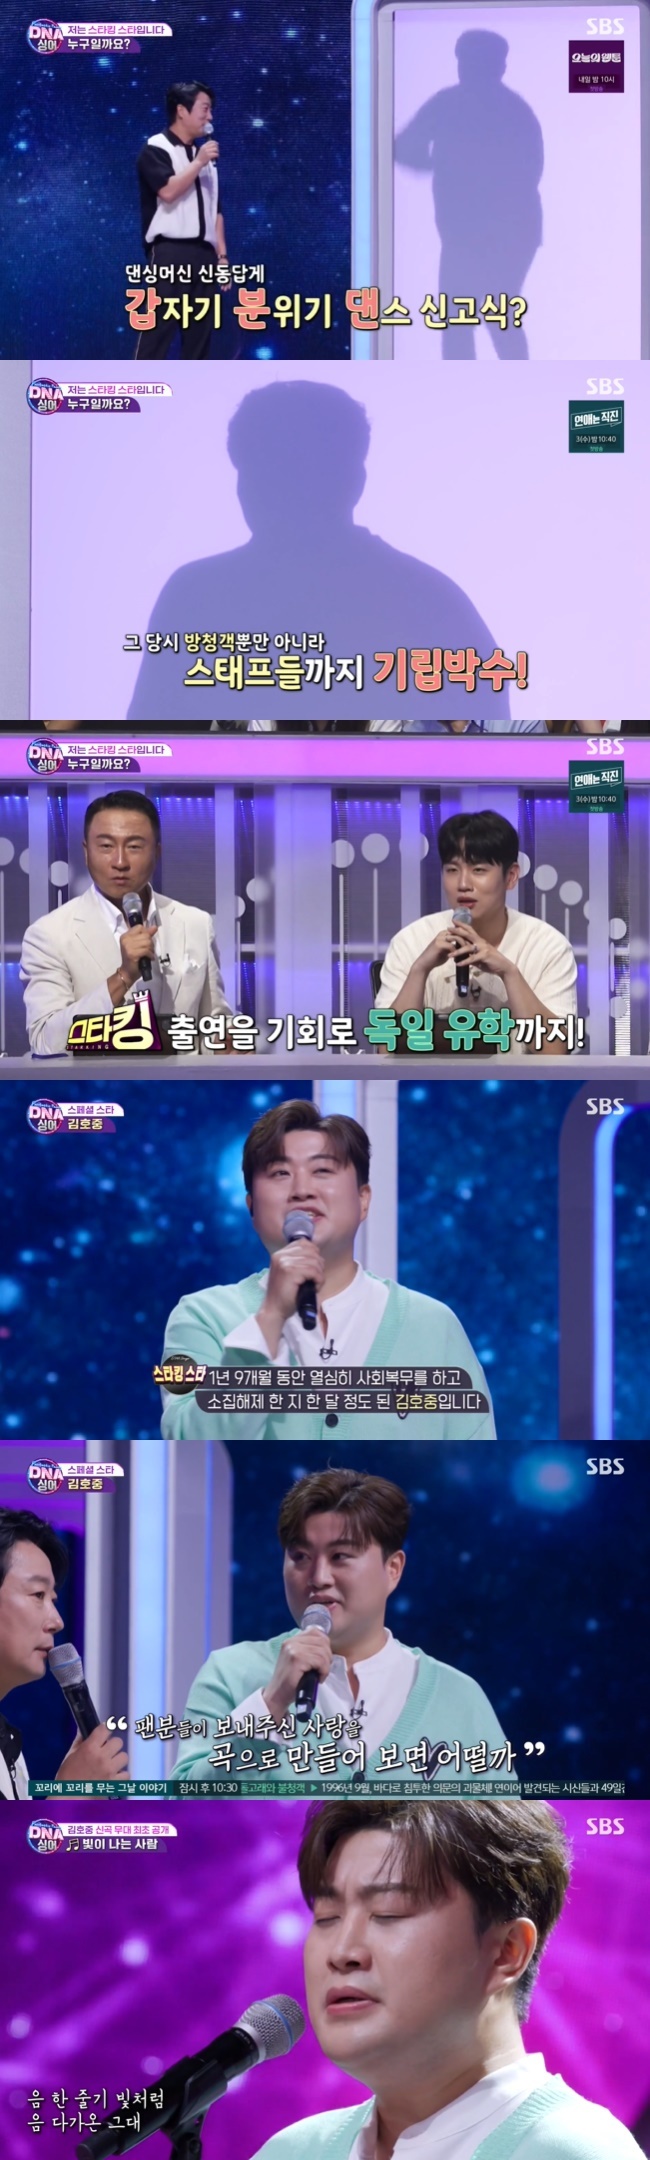 Kim Ho-joong first released the new song The Lighting Person stage.Kim Ho-joong appeared in a surprise on SBS DNA Singer - Fantastic Family broadcast on July 28.At the end of the broadcast, Lee Soo-geun said, A very special guest came. I wanted to come here and kept calling the production team.I have to come out with my Family, he said, and I said that I want to come out alone because I have no one to go through the whole Family. So Jang Do-yeon and Yang Se-chan were laughing.Kim Ho-joong appeared as a Silhouette, introducing his keywords as stocking stars. The performers mentioned Super Junior prodigy on the side line that was slightly revealed.When Kim Ho-joong danced and played a joke, Lee Soo-geun laughed, pointing out, You did not see it as a shadow, it was really bad from the side.Kim Ho-joong mentioned the topic of singing in stockings in the past. I was in high school, and then the audience and the crew gave me a standing ovation.At that time, he was contacted by Germany and went to Germany to study in Germany. He made my story from film history to film. Kim Ho-joong, who revealed his identity after that, introduced himself as Kim Ho-joong, who has been working hard for a year and nine months and has been canceled for about a month.I made a new song The Lighting Man because I thought about melting it and making it into lyrics and attaching a melody. 